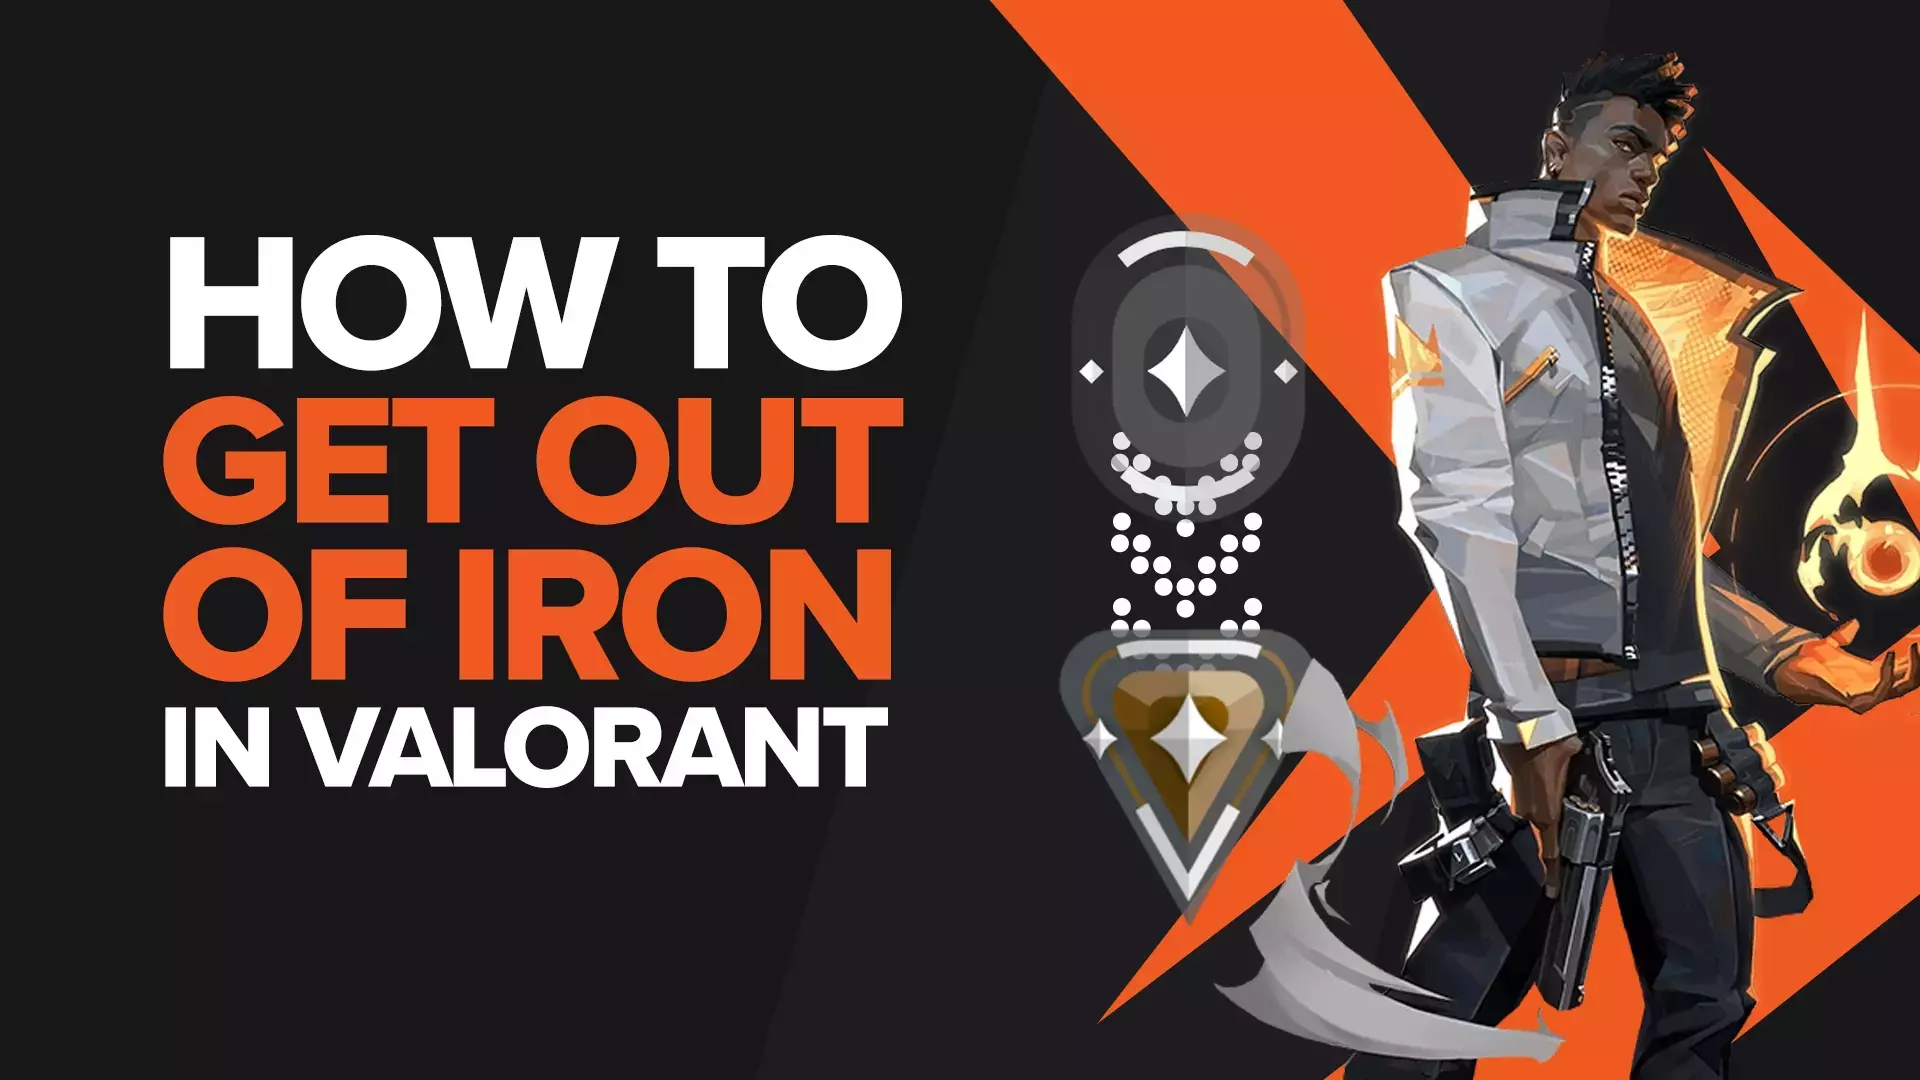 How to get out of Iron in Valorant?